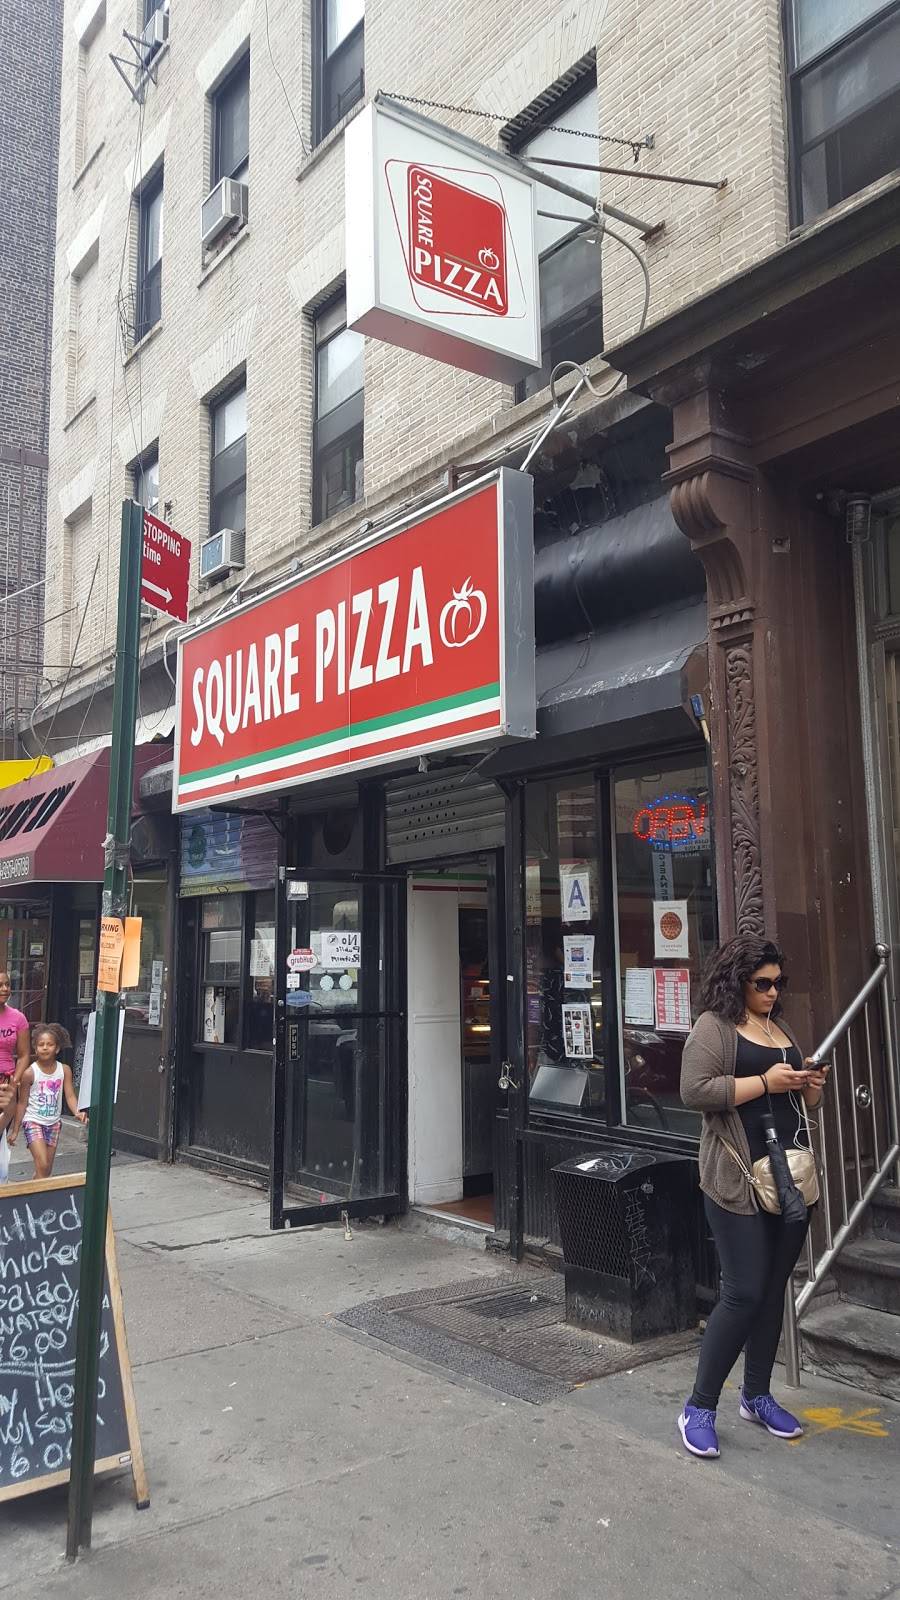 Clinton Square Pizza | meal delivery | 201 Clinton St, New York, NY 10002, USA | 6466784294 OR +1 646-678-4294